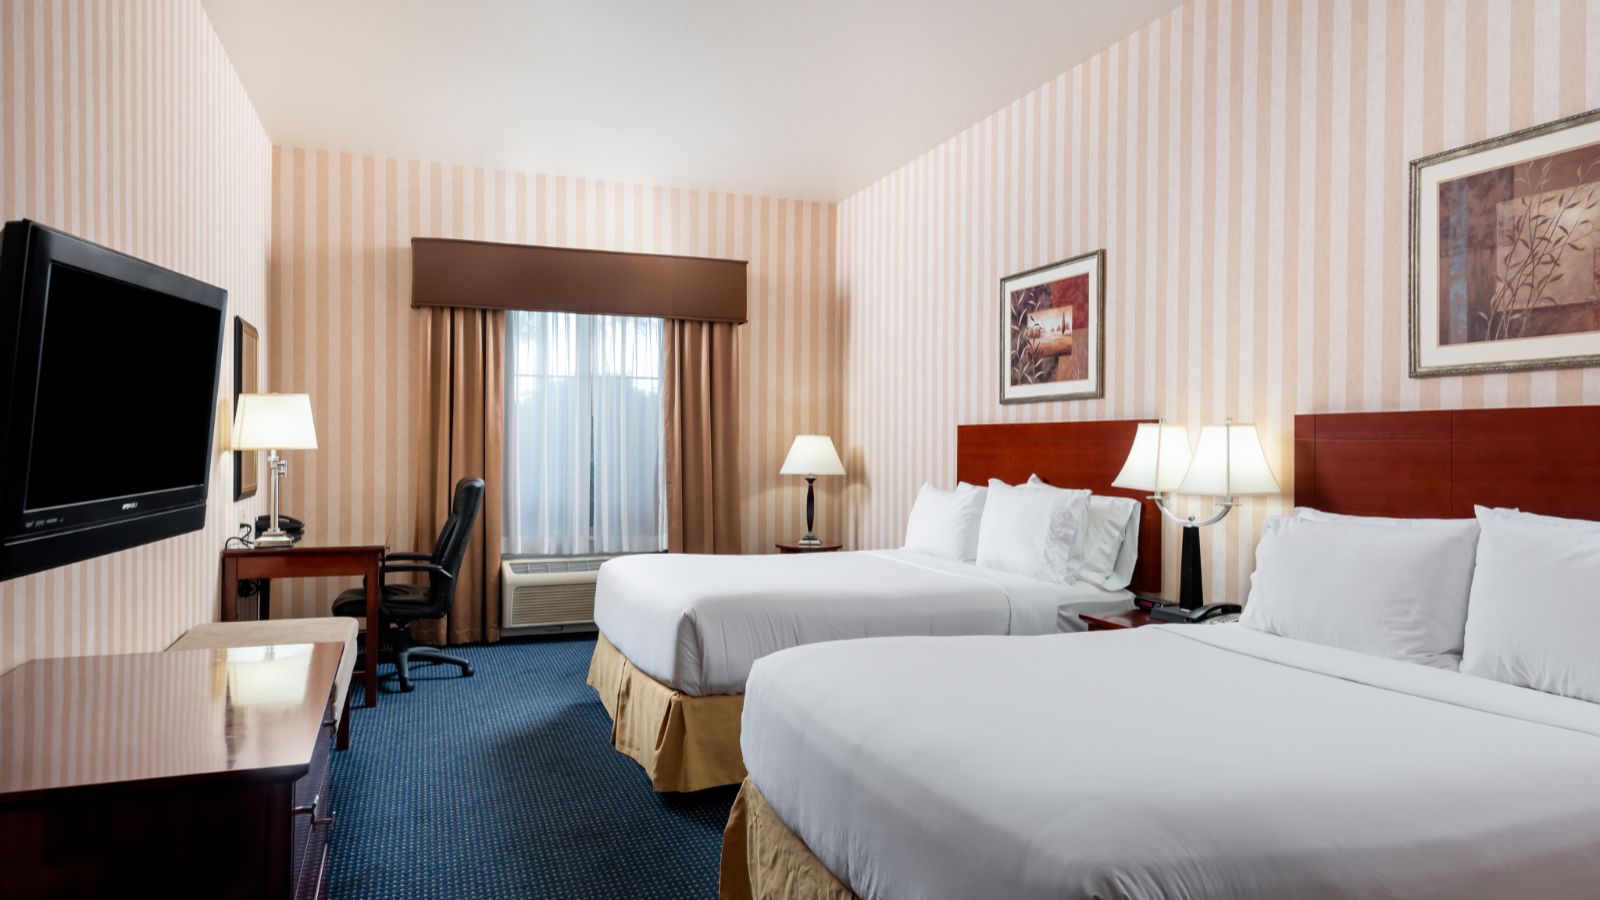 Lathrop Holiday Inn Express rooms and suites